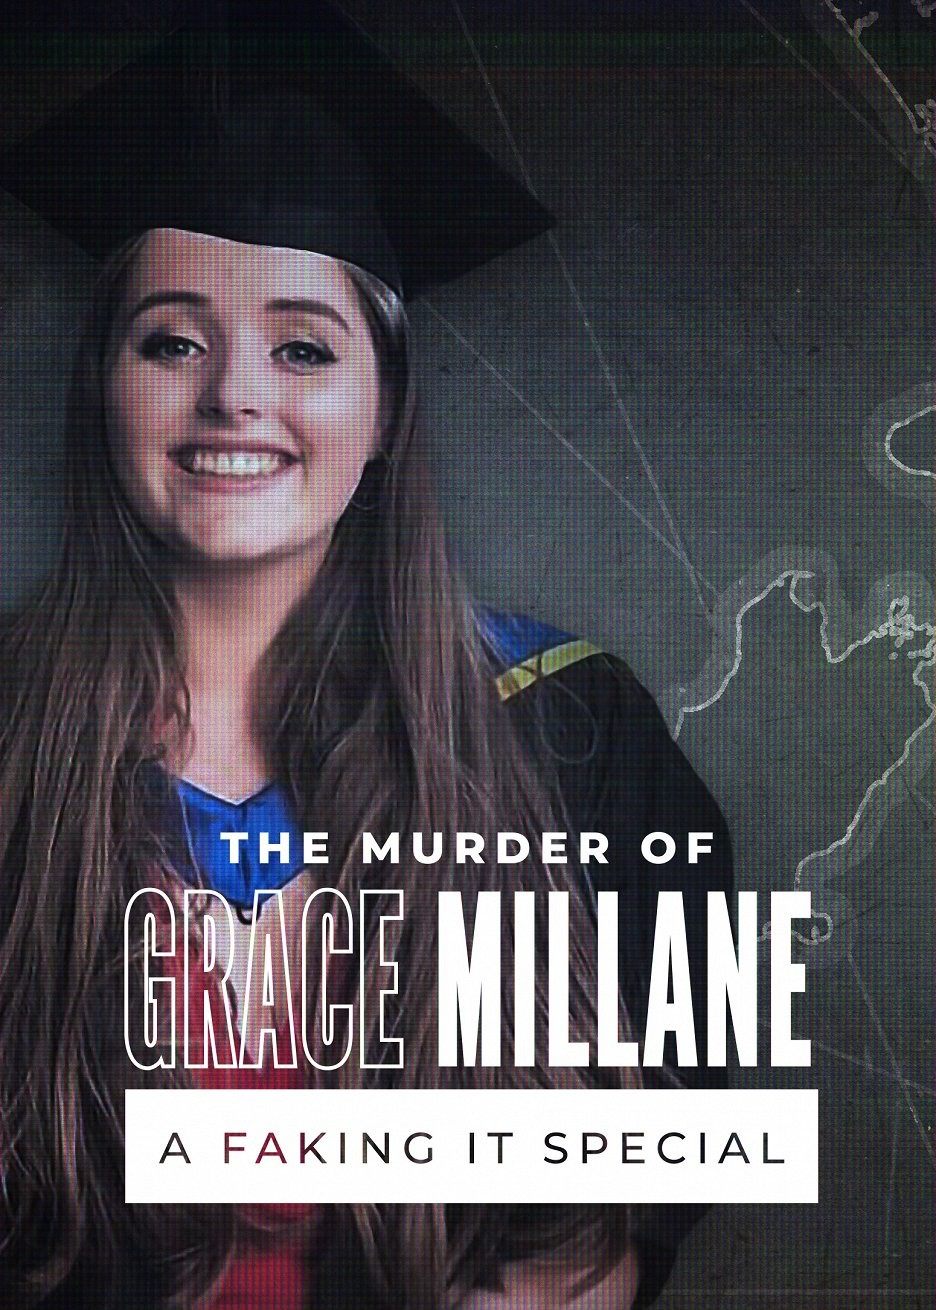 Documentary The Murder of Grace Millane: A Faking It Special